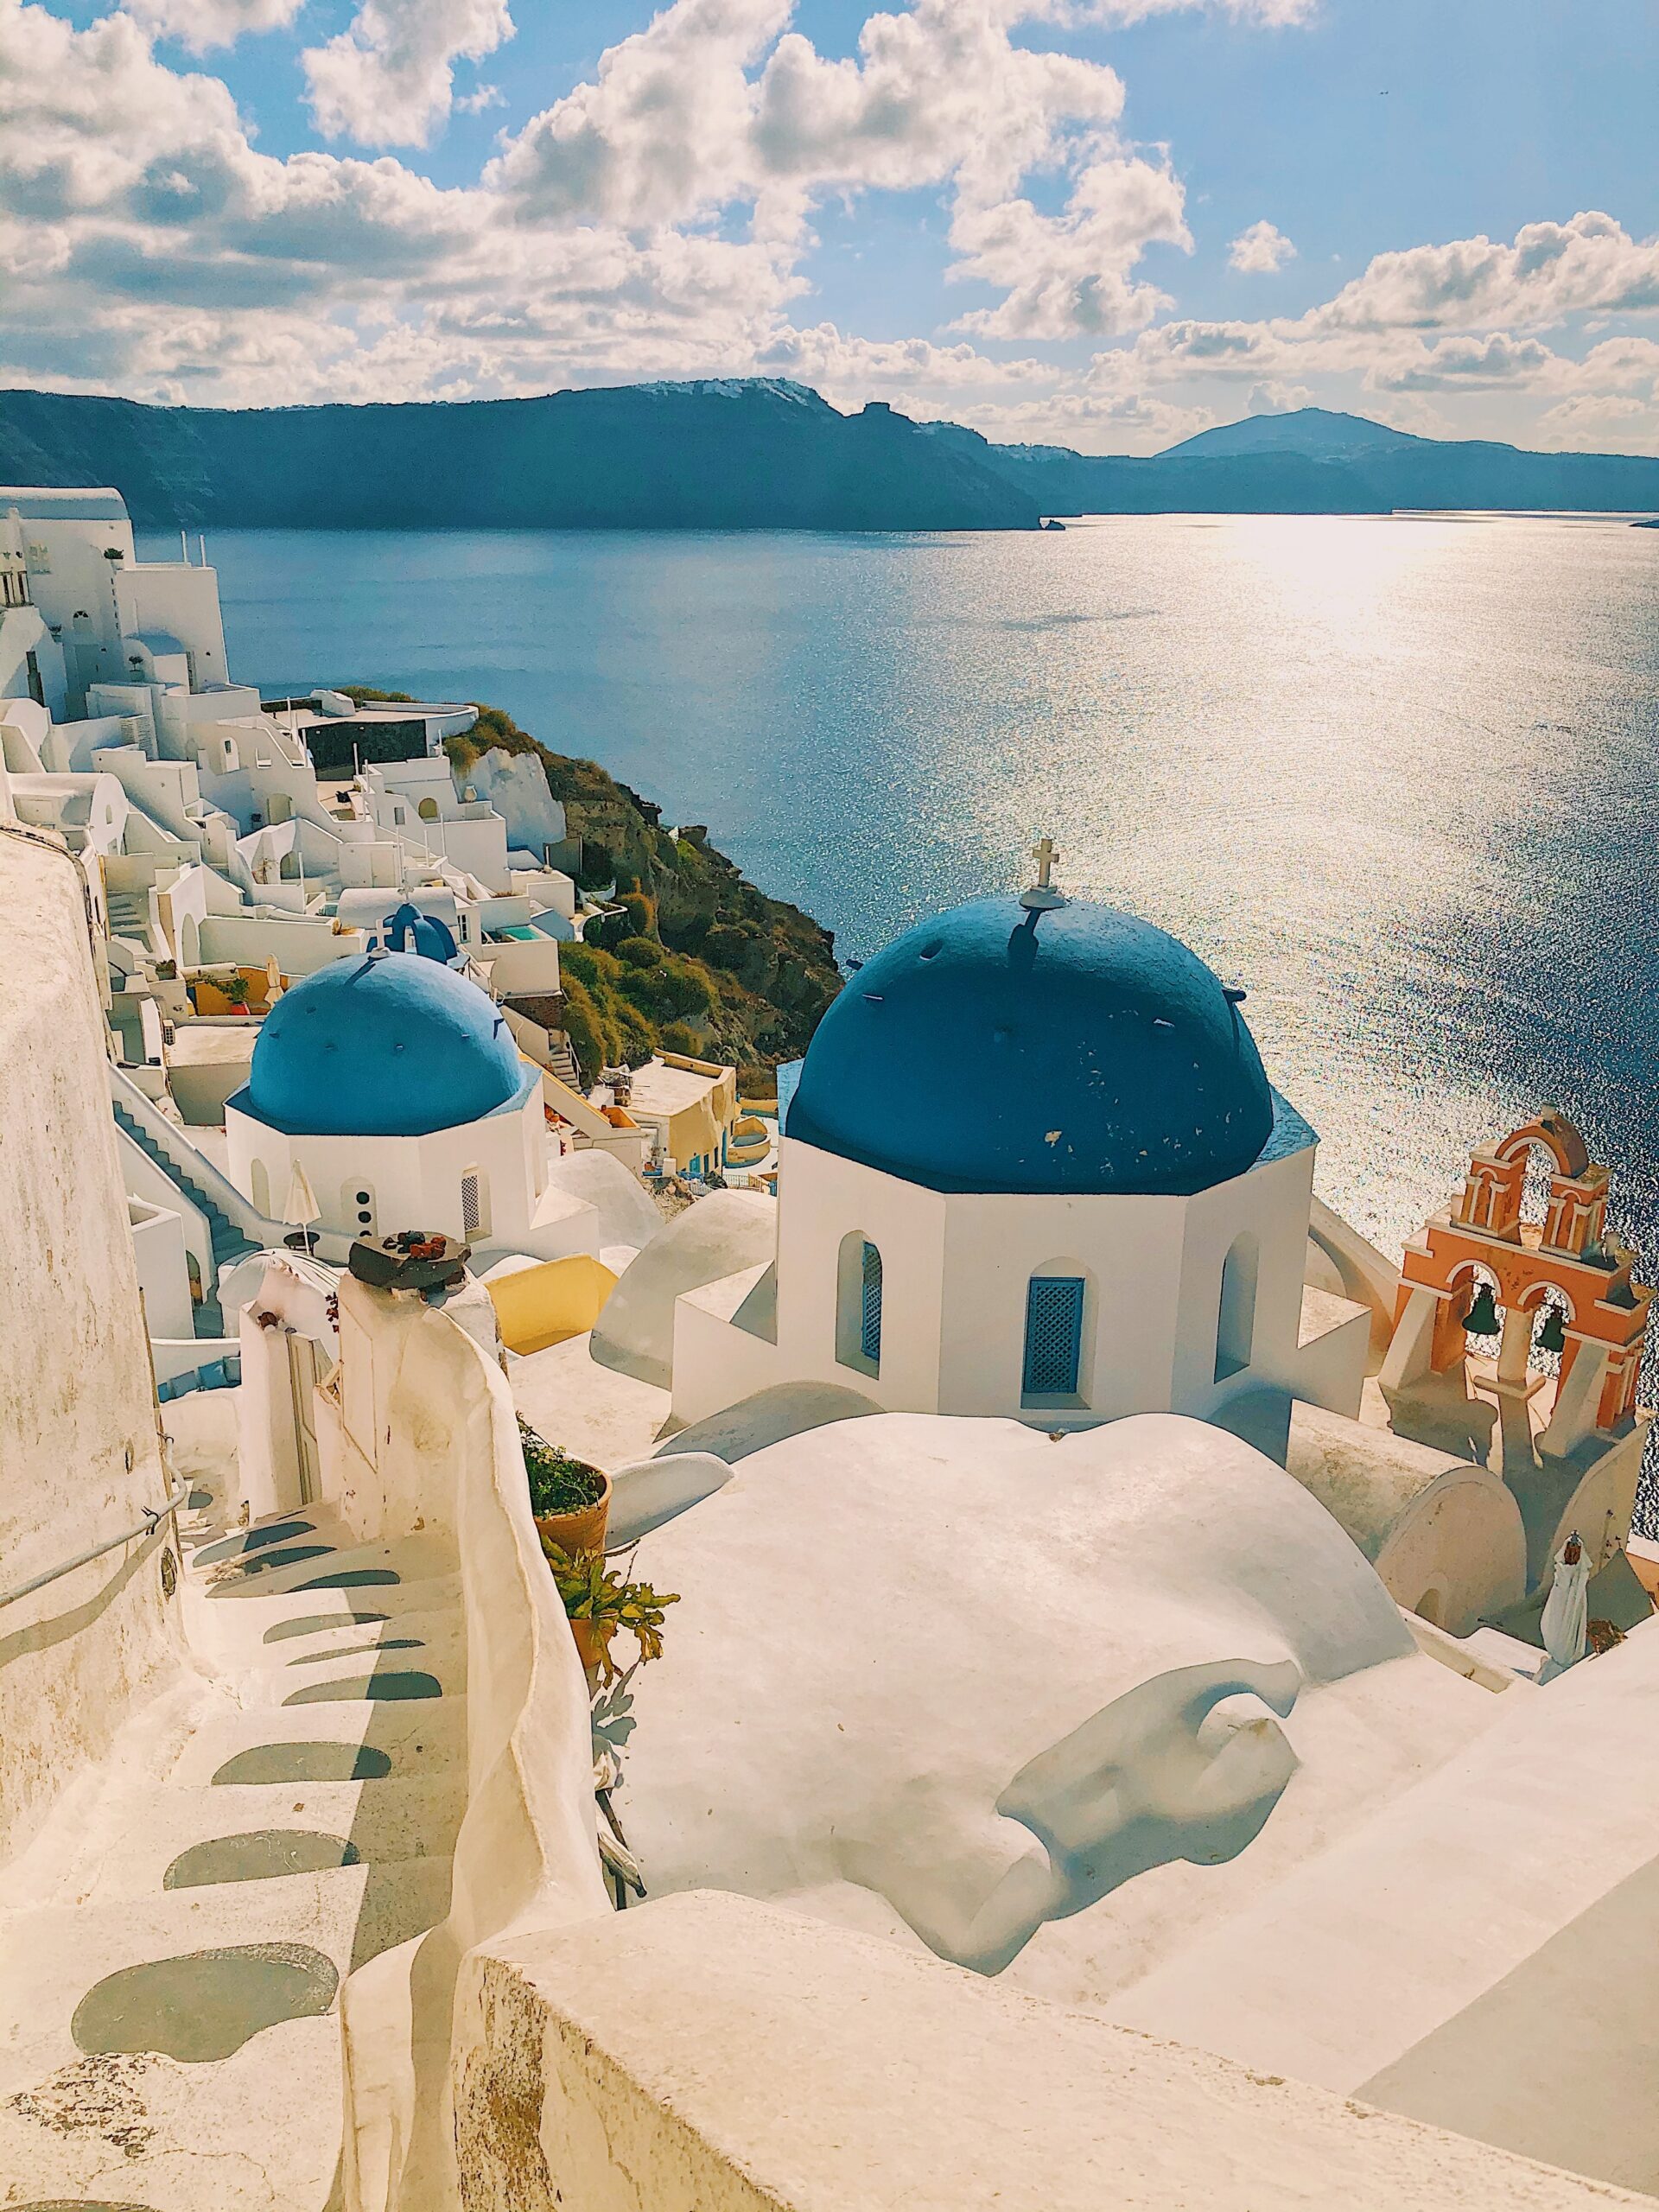 Santorini holidays from Manchester are currently on sale